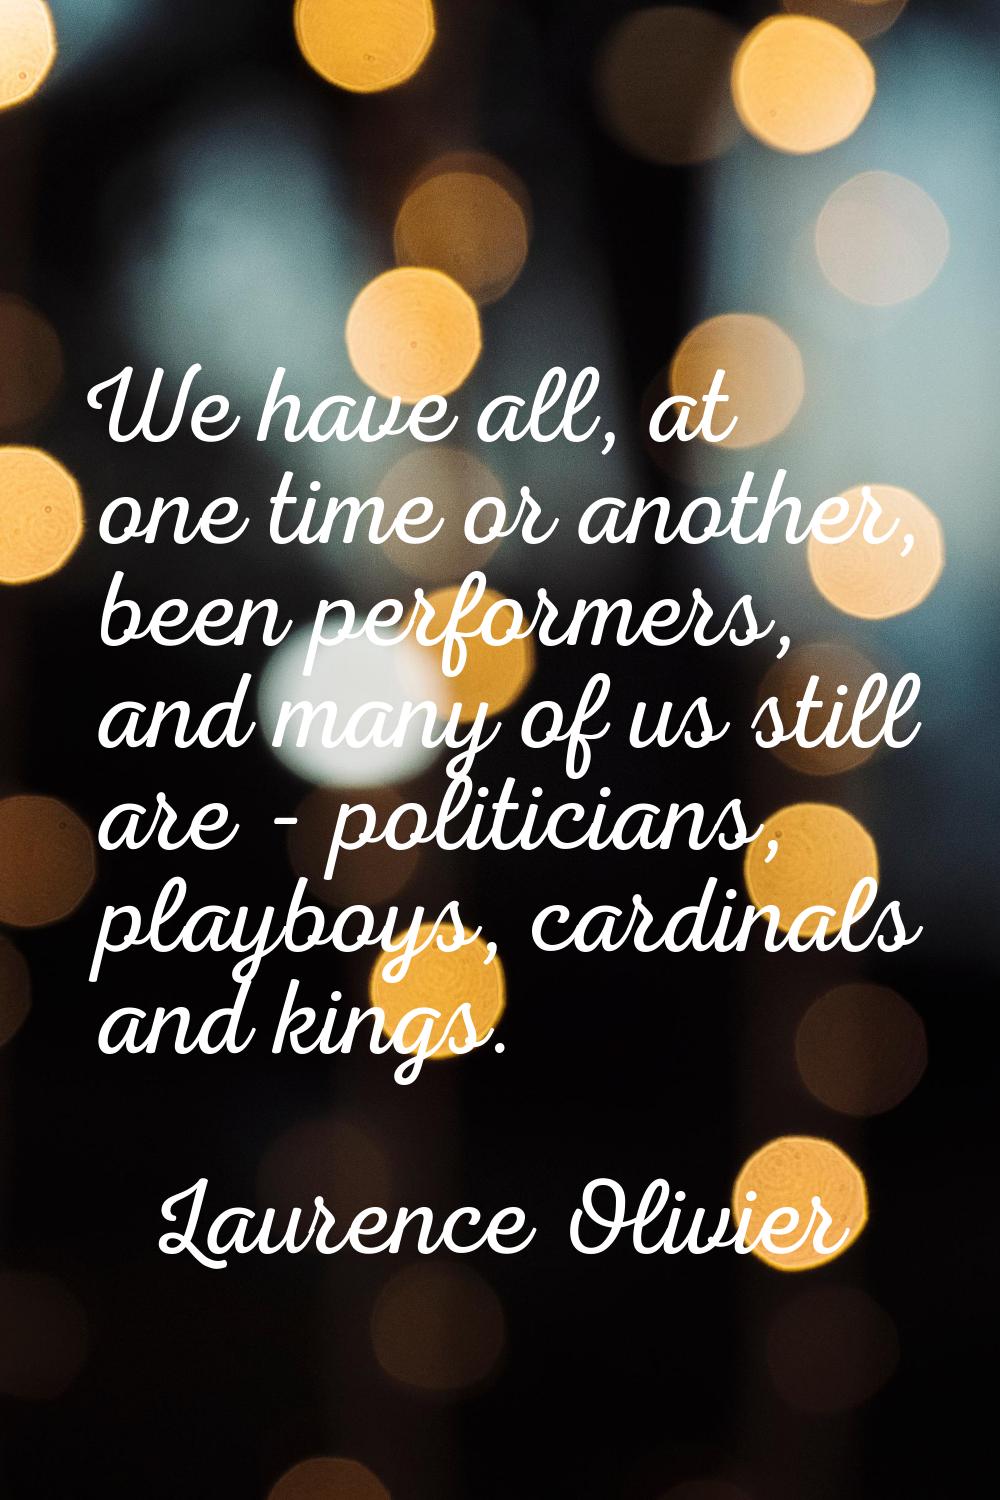 We have all, at one time or another, been performers, and many of us still are - politicians, playb